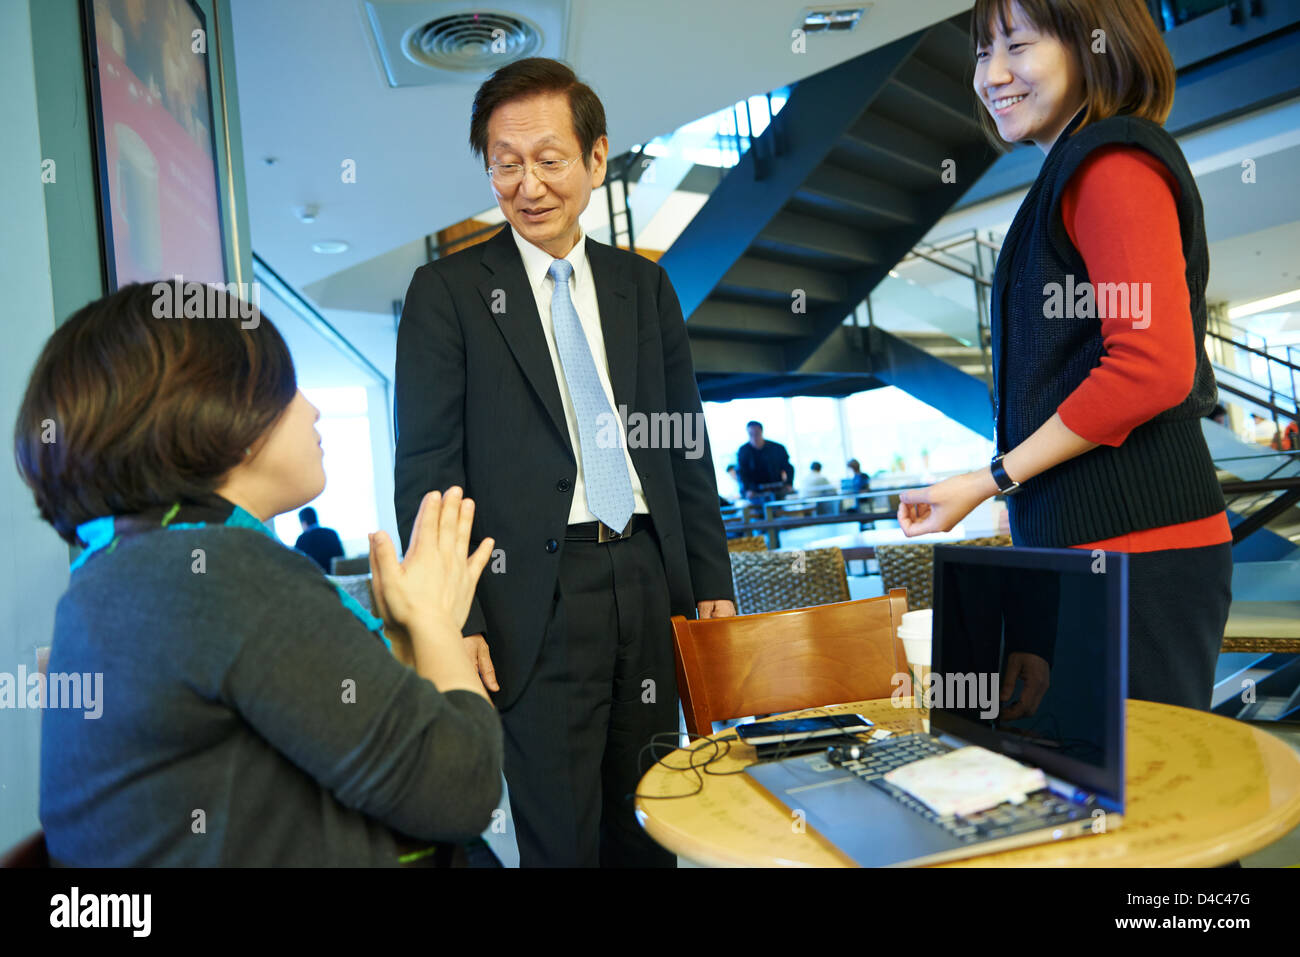 Jonney Shih, Chairman of ASUS, interacts with coworkers at Starbucks on campus of the ASUS Headquarters in Taiwan. Stock Photo